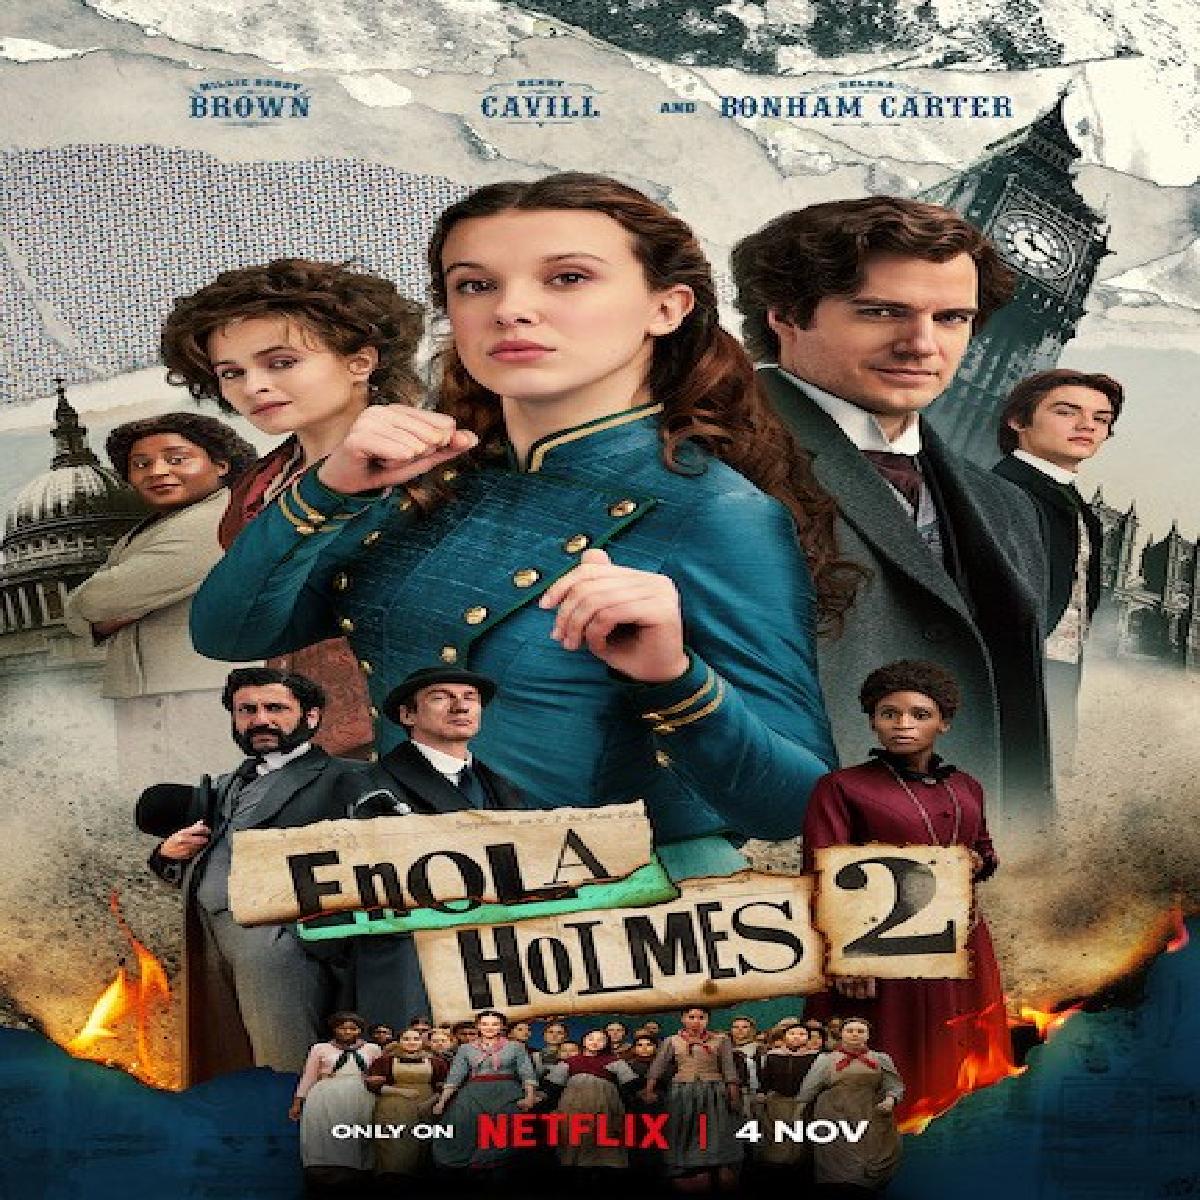 Check Out The New Trailer For Enola Holmes 2